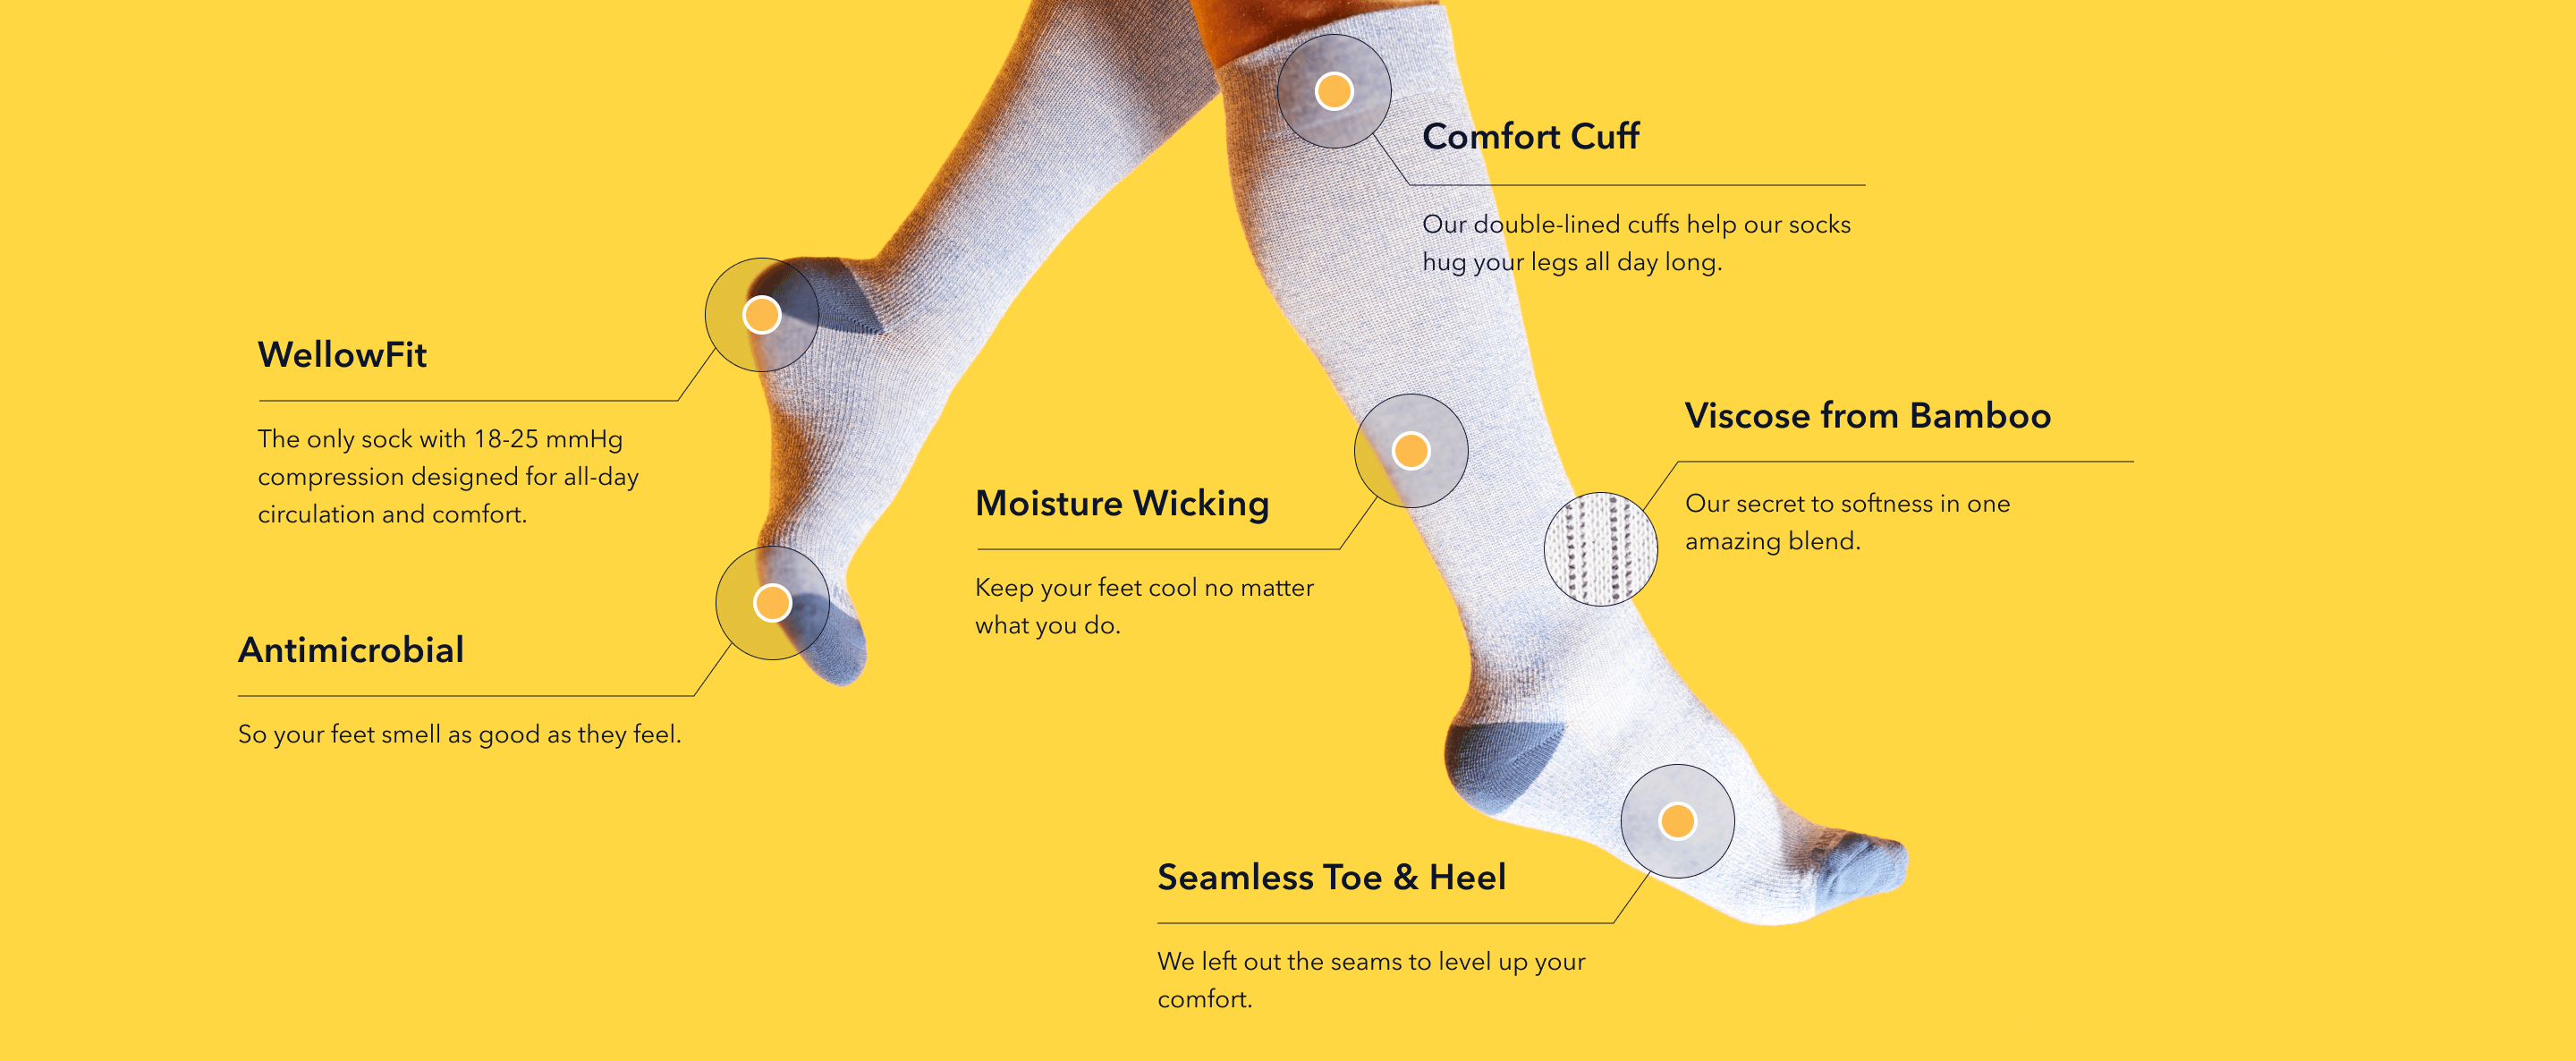 s Best-selling Compression Socks Are on Sale